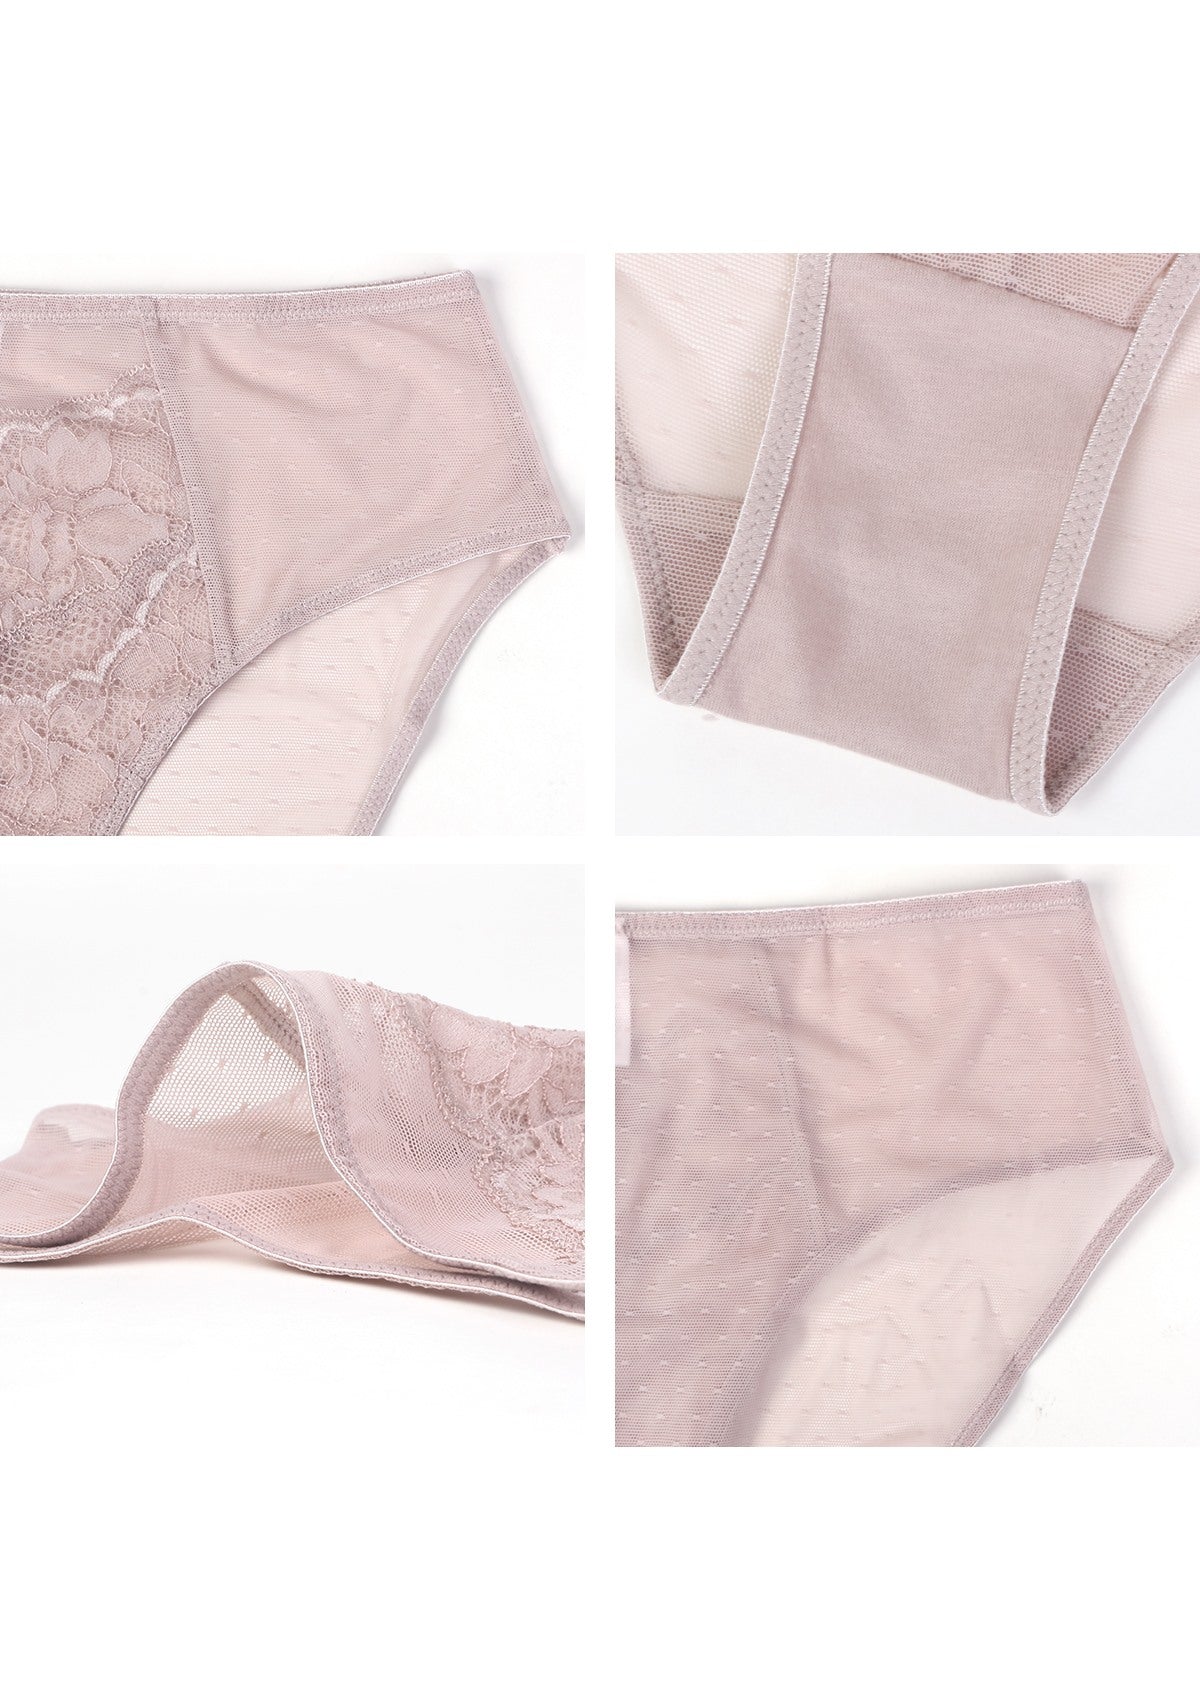 HSIA Enchante High-Rise Floral Lacy Panty-Comfort In Style - M / Dark Pink